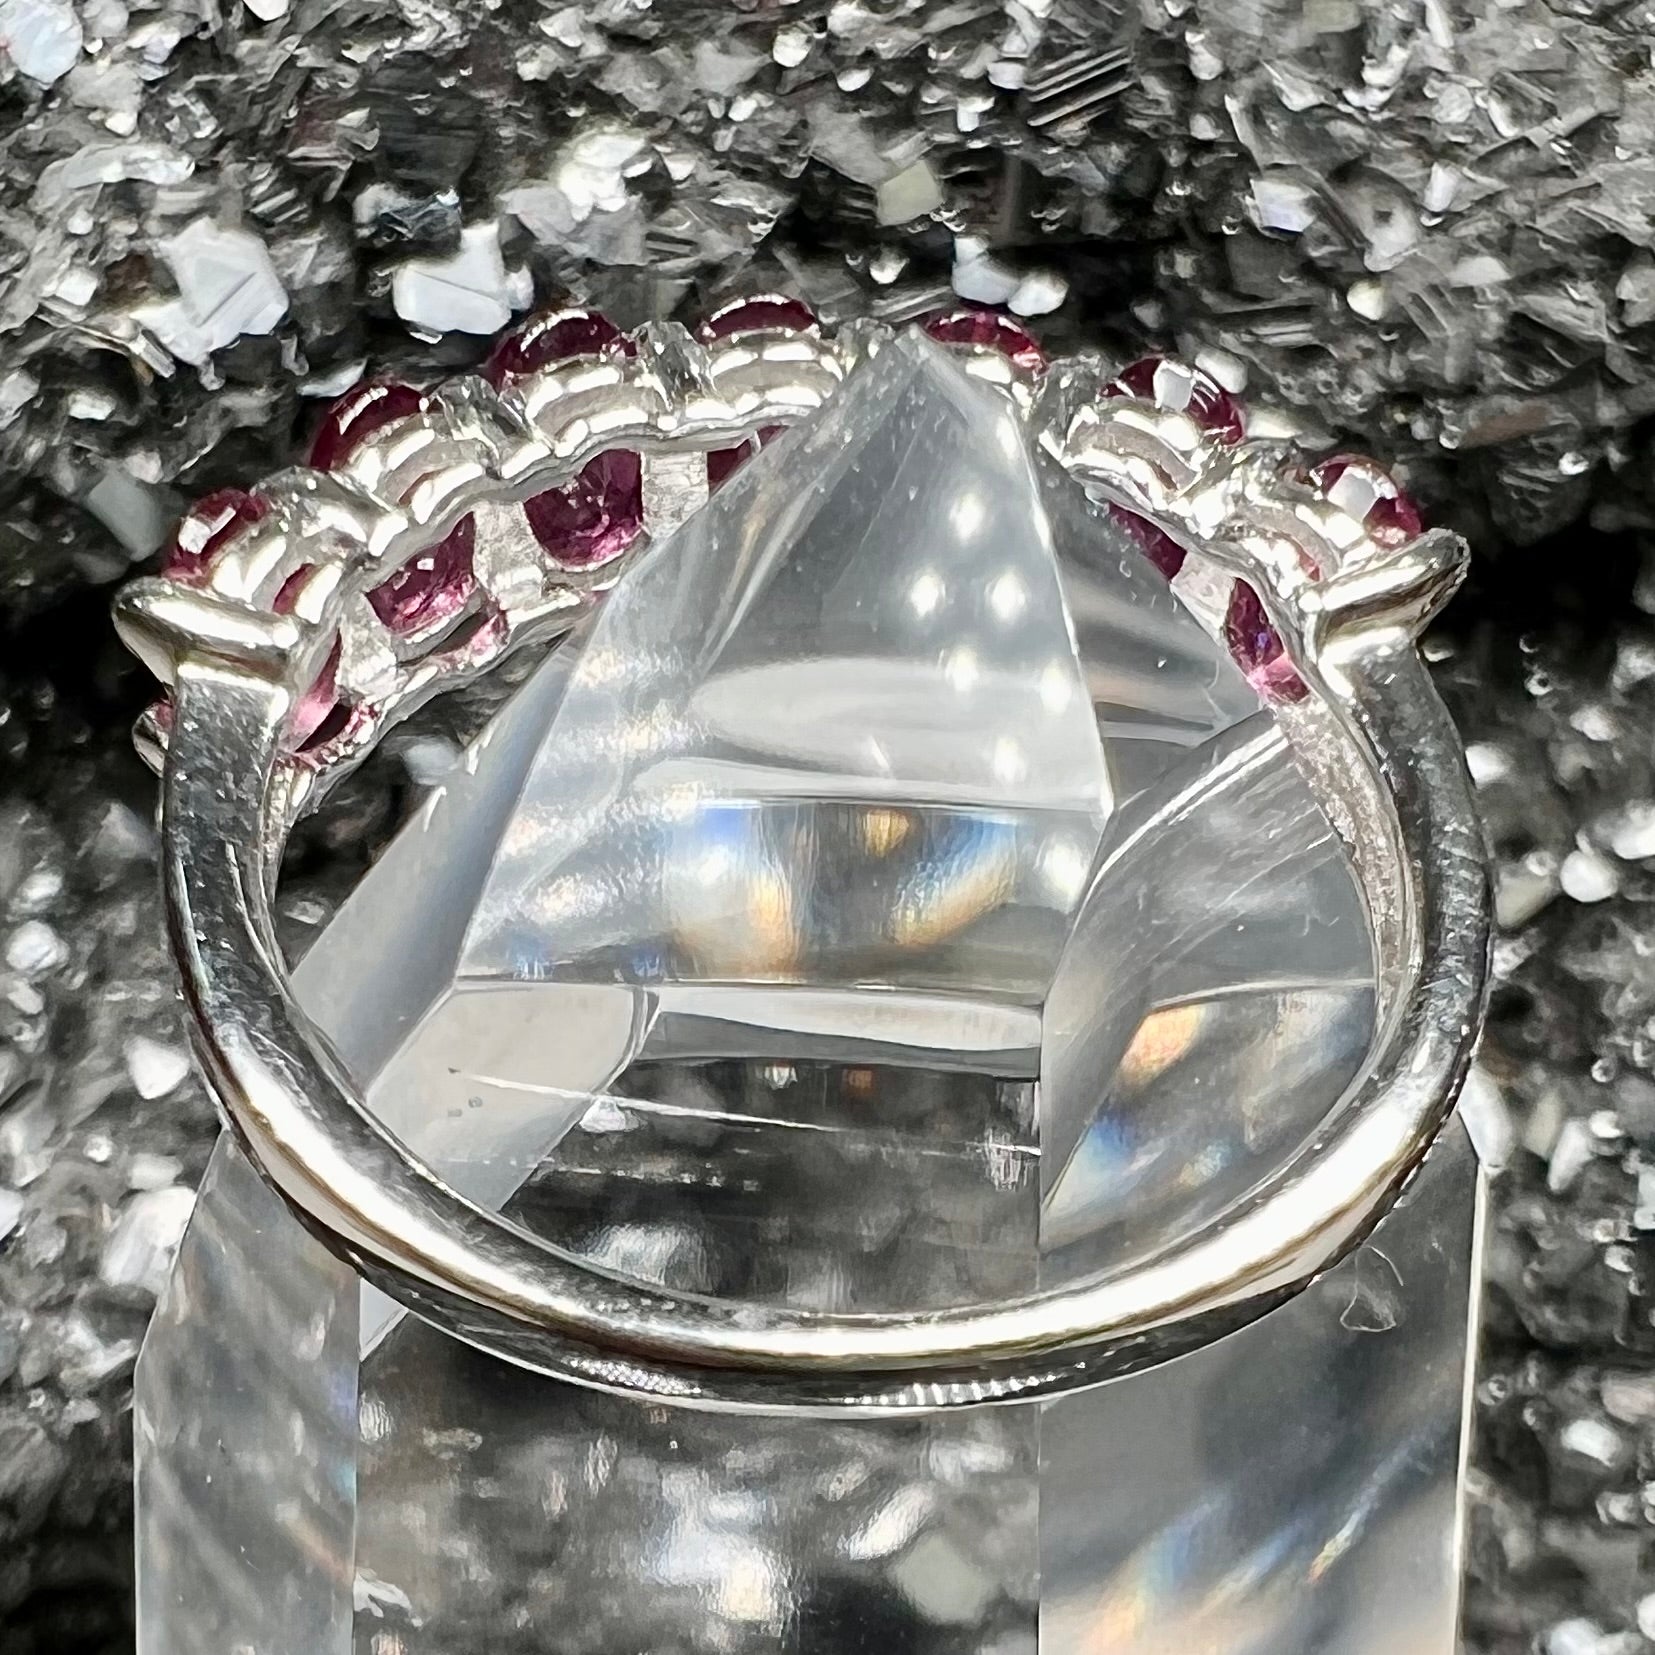 A sterling silver band set with 7 oval cut, purple rhodolite garnet stones.